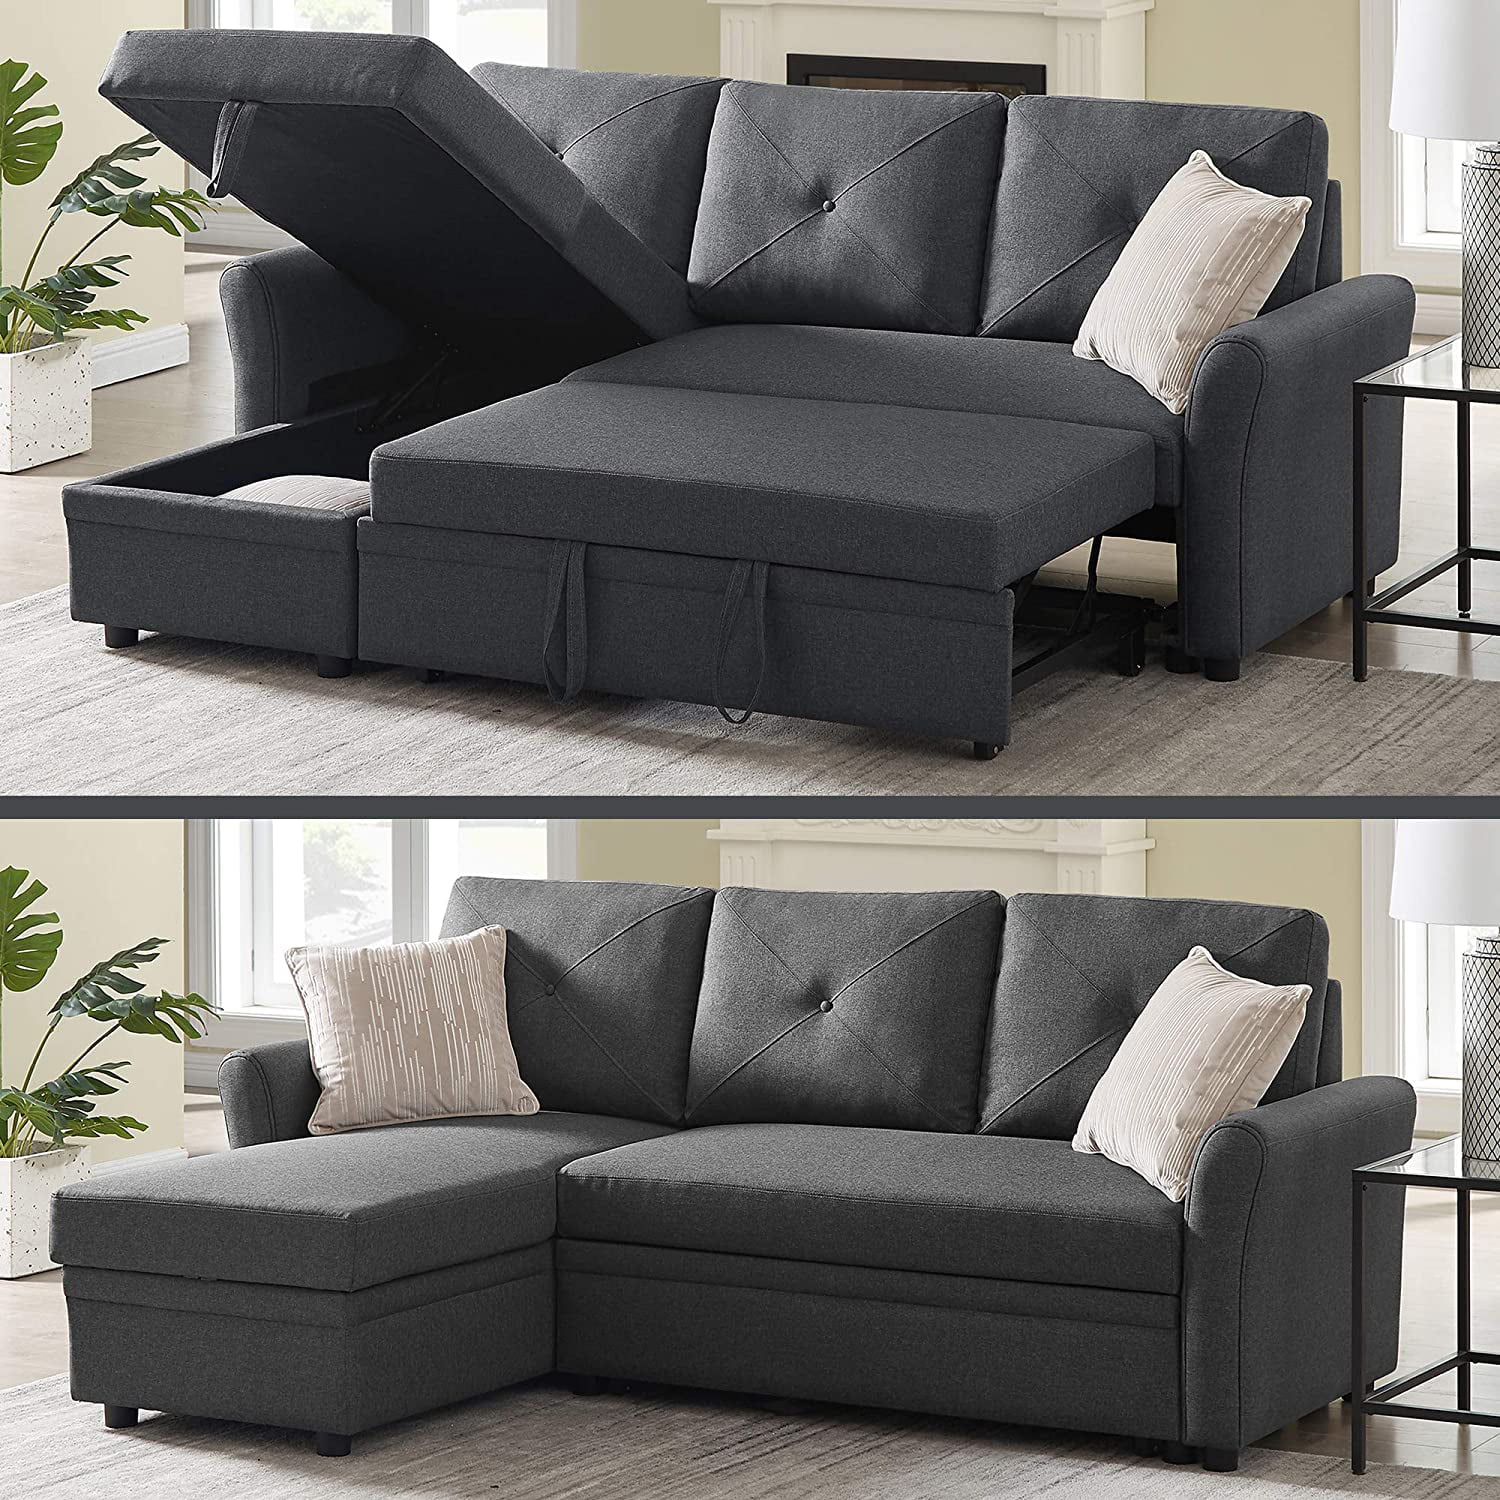 Couch Bed Sofa Sectional Living Room Sleeper Futon Furniture Loveseat Pad Details about   HOT!! 